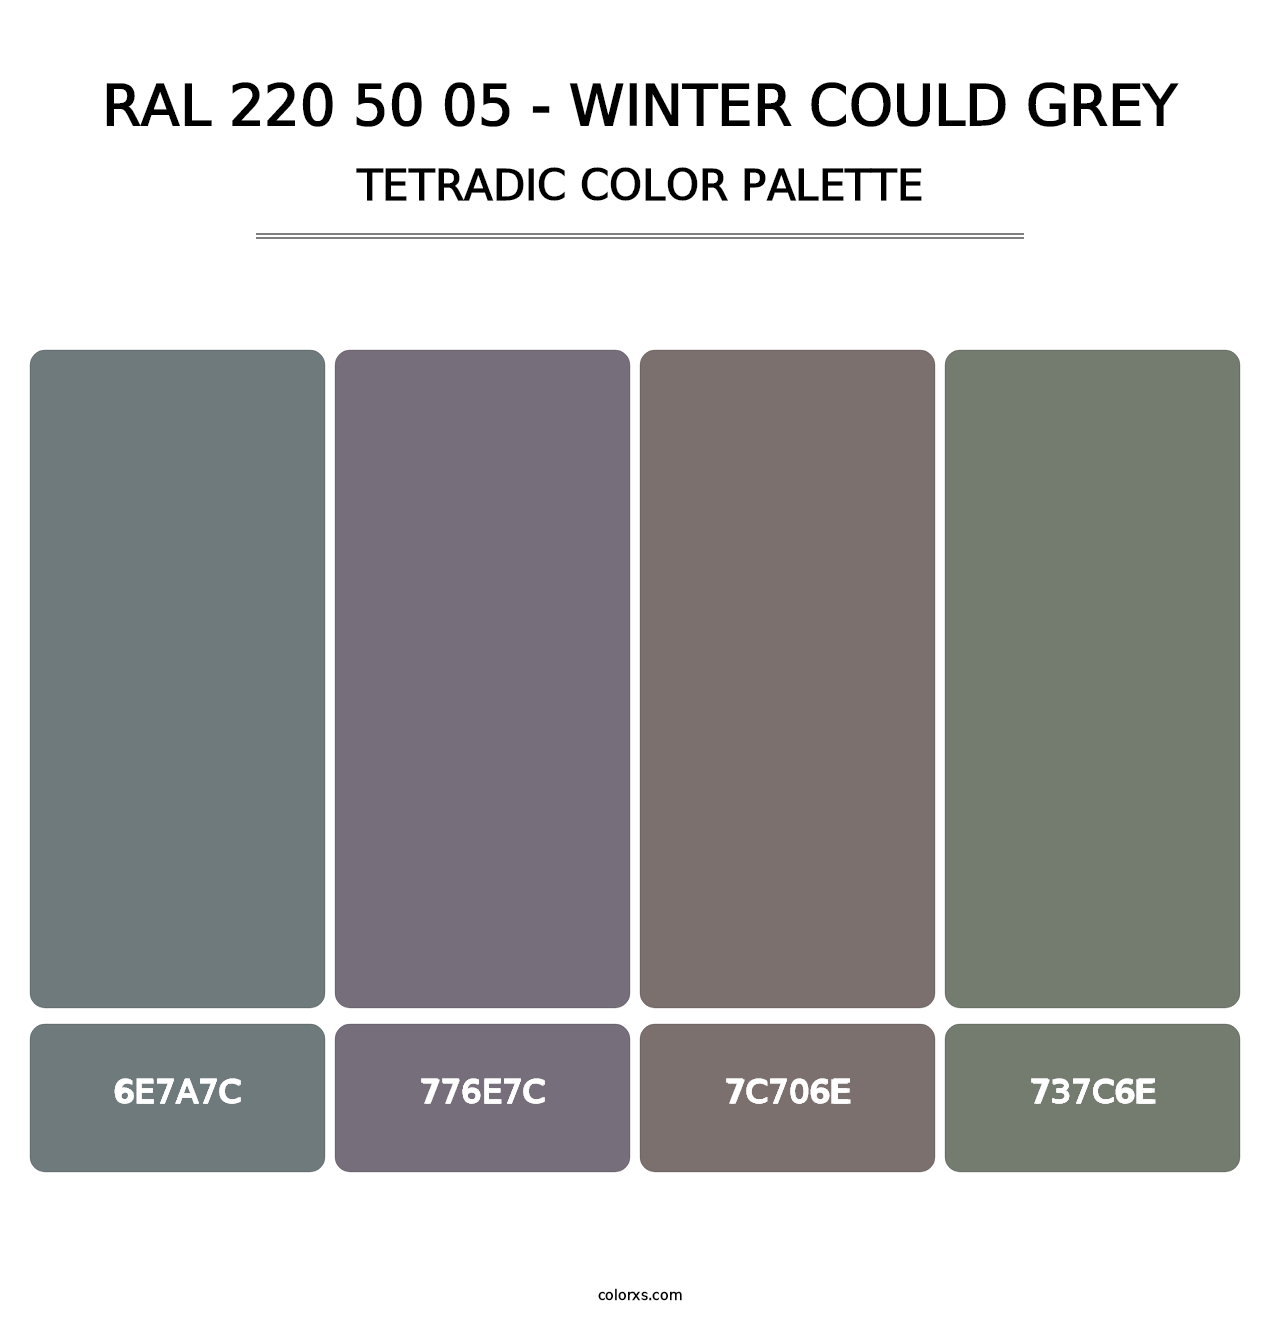 RAL 220 50 05 - Winter Could Grey - Tetradic Color Palette